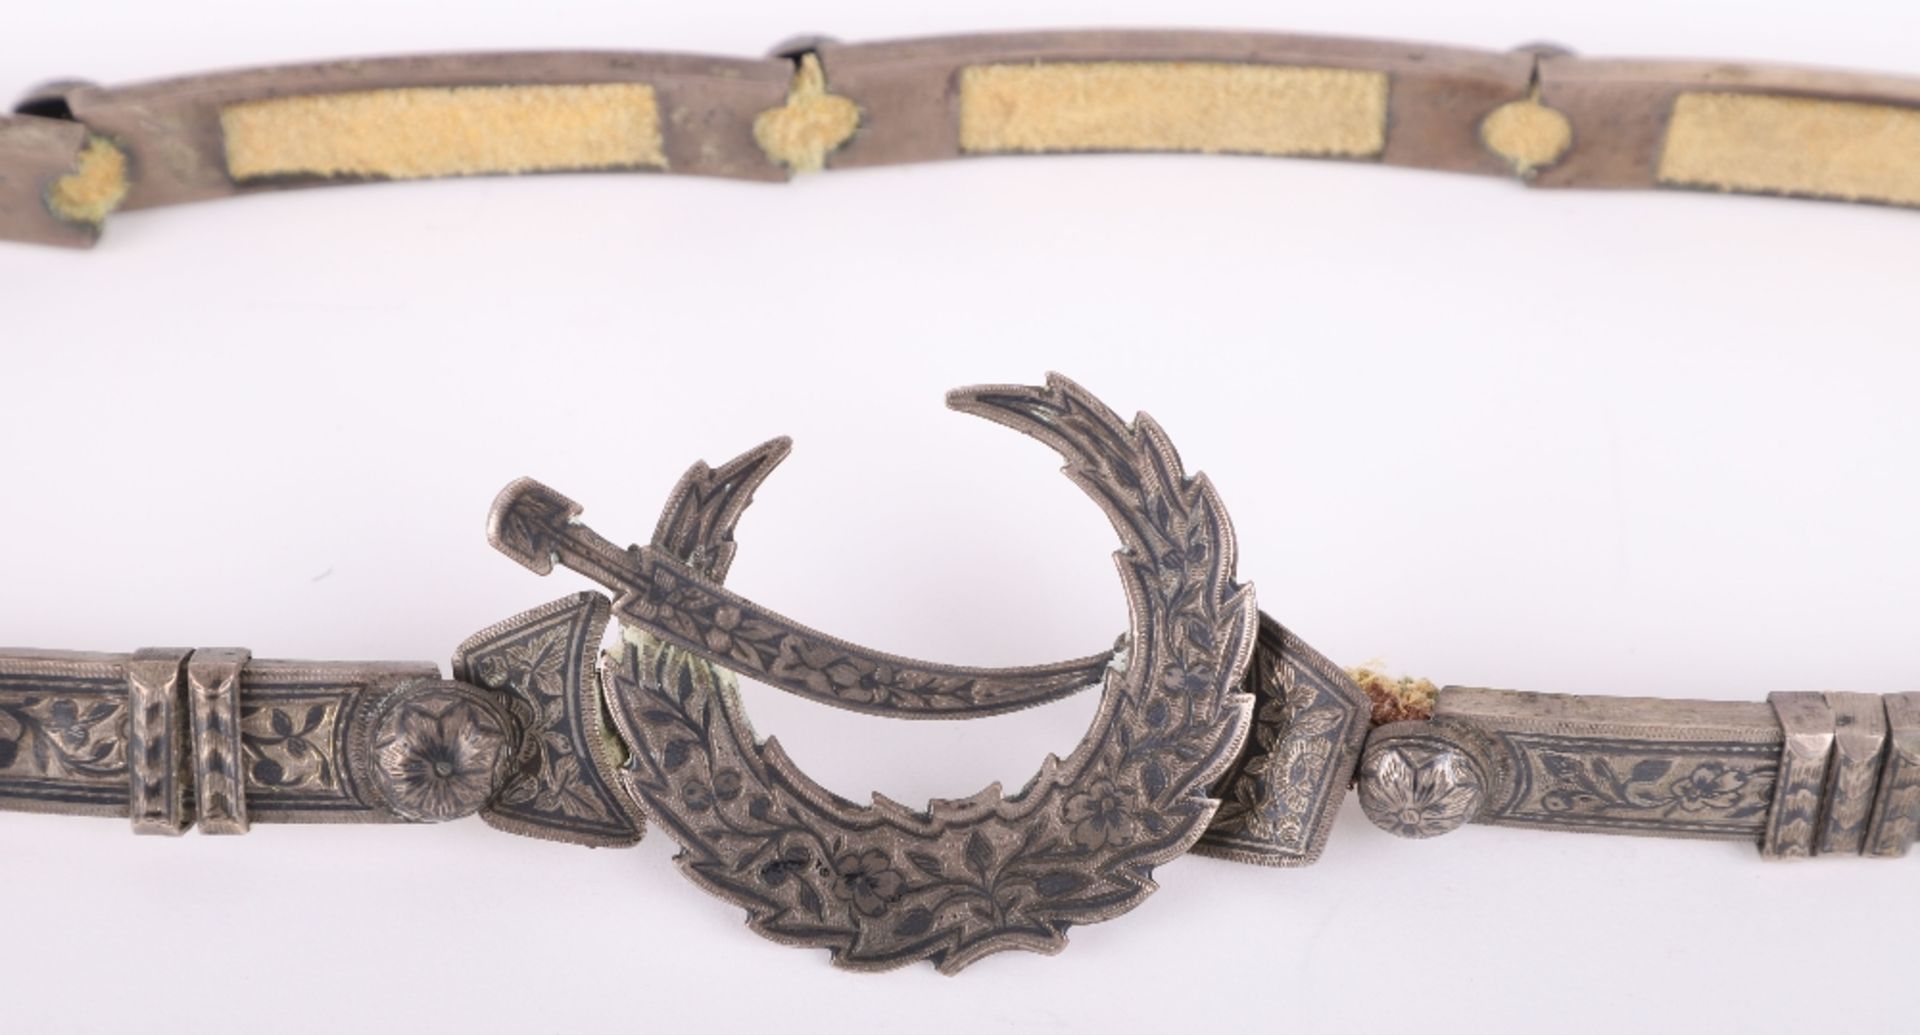 Fine Quality Late 19th Century / Early 20th Century Russian Kinjal Belt - Image 3 of 8